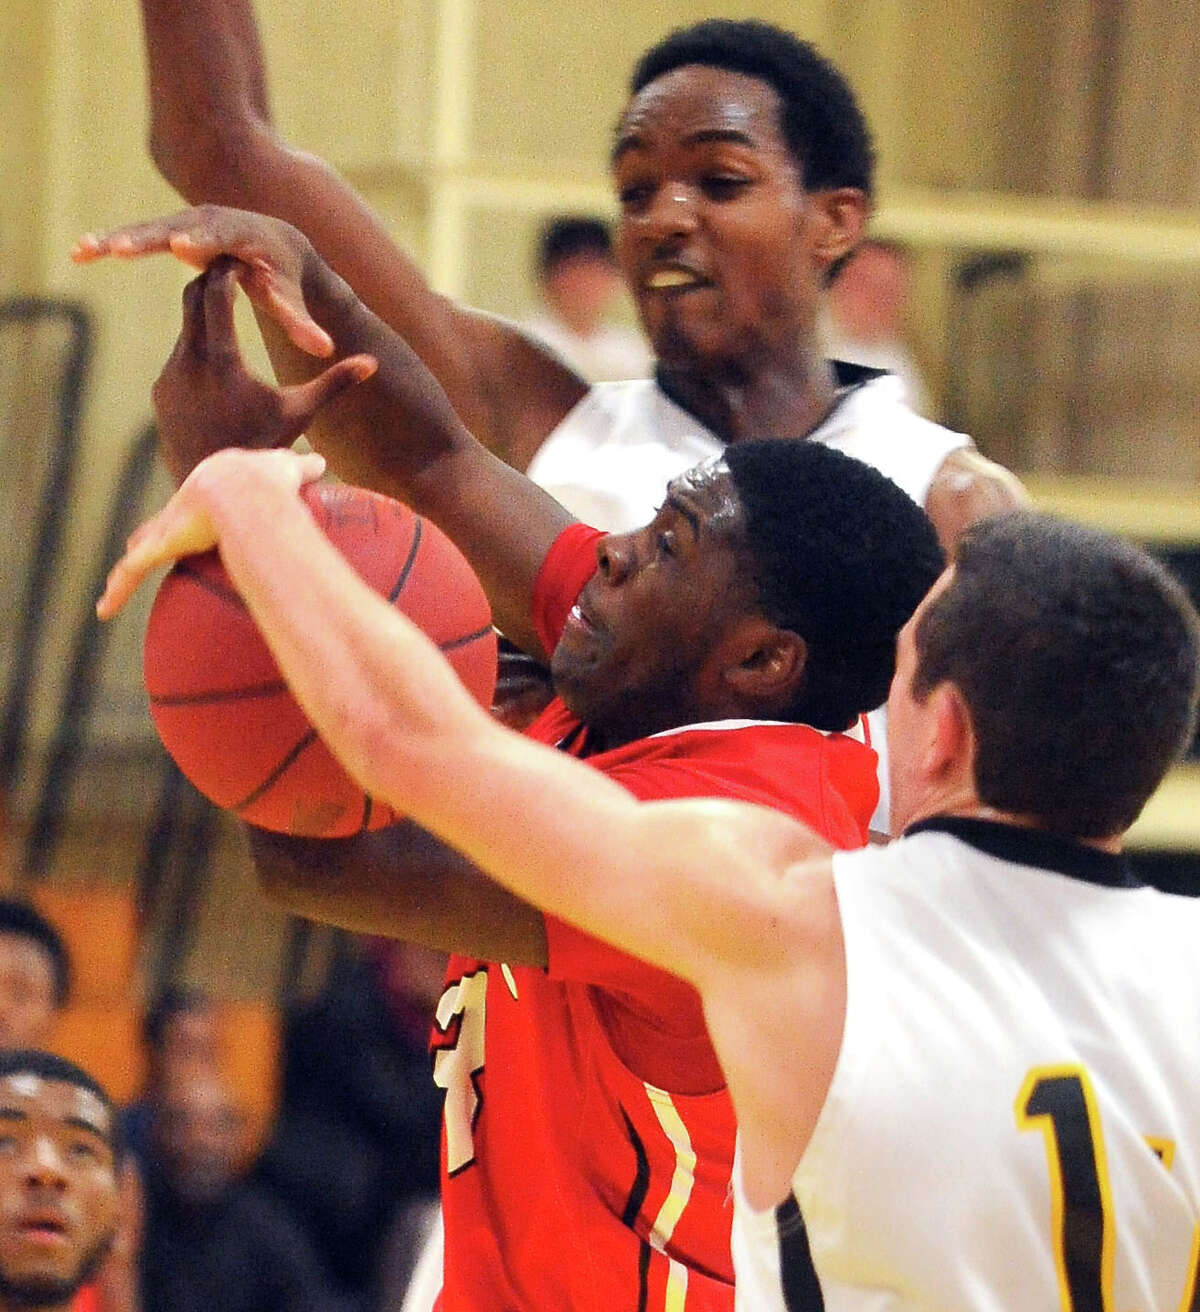 Wednesday's New Haven County Boys Basketball Roundup: Ricky Steele's buzzer- beater lifts Hyde